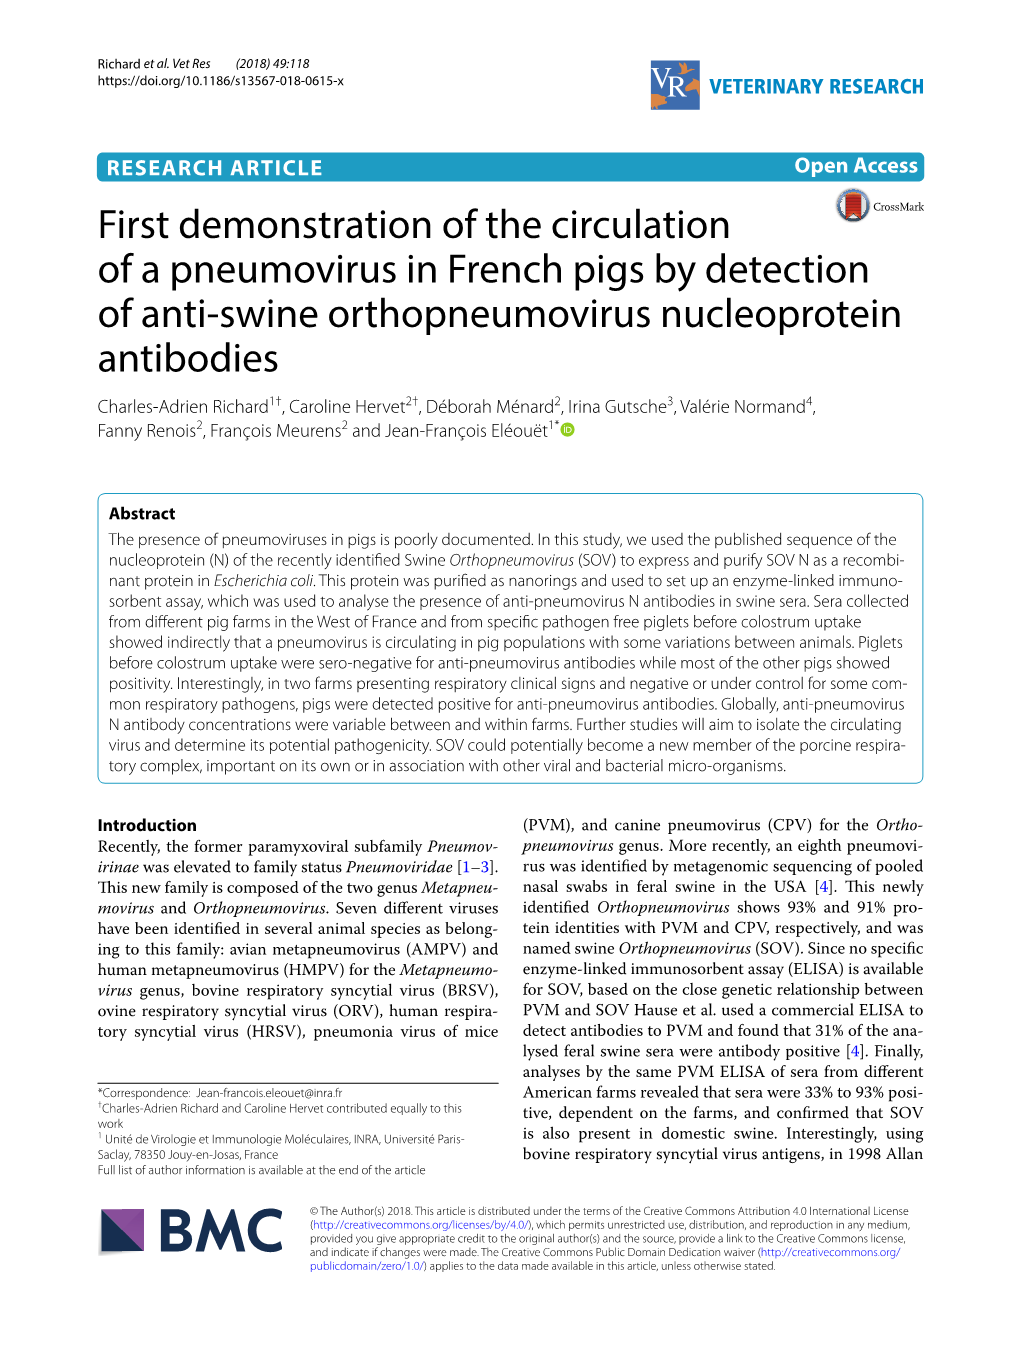 First Demonstration of the Circulation of a Pneumovirus in French Pigs by Detection of Anti-Swine Orthopneumovirus Nucleoprotein